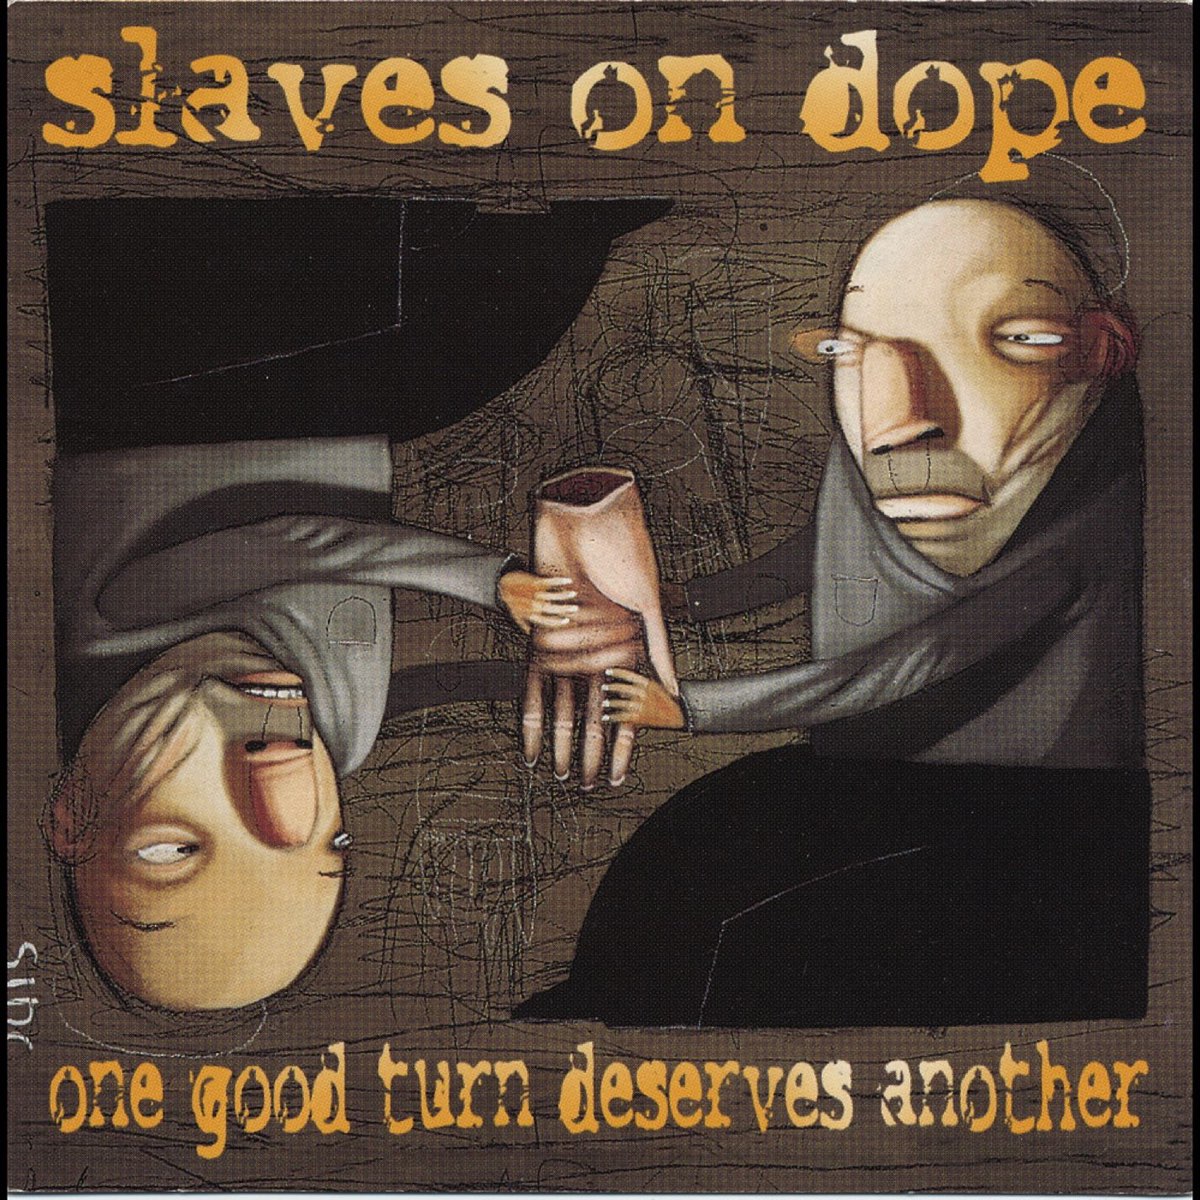 One good turn. One good turn deserves another. Slaves on Dope. Slaves альбом. 2 One good turn deserves another.